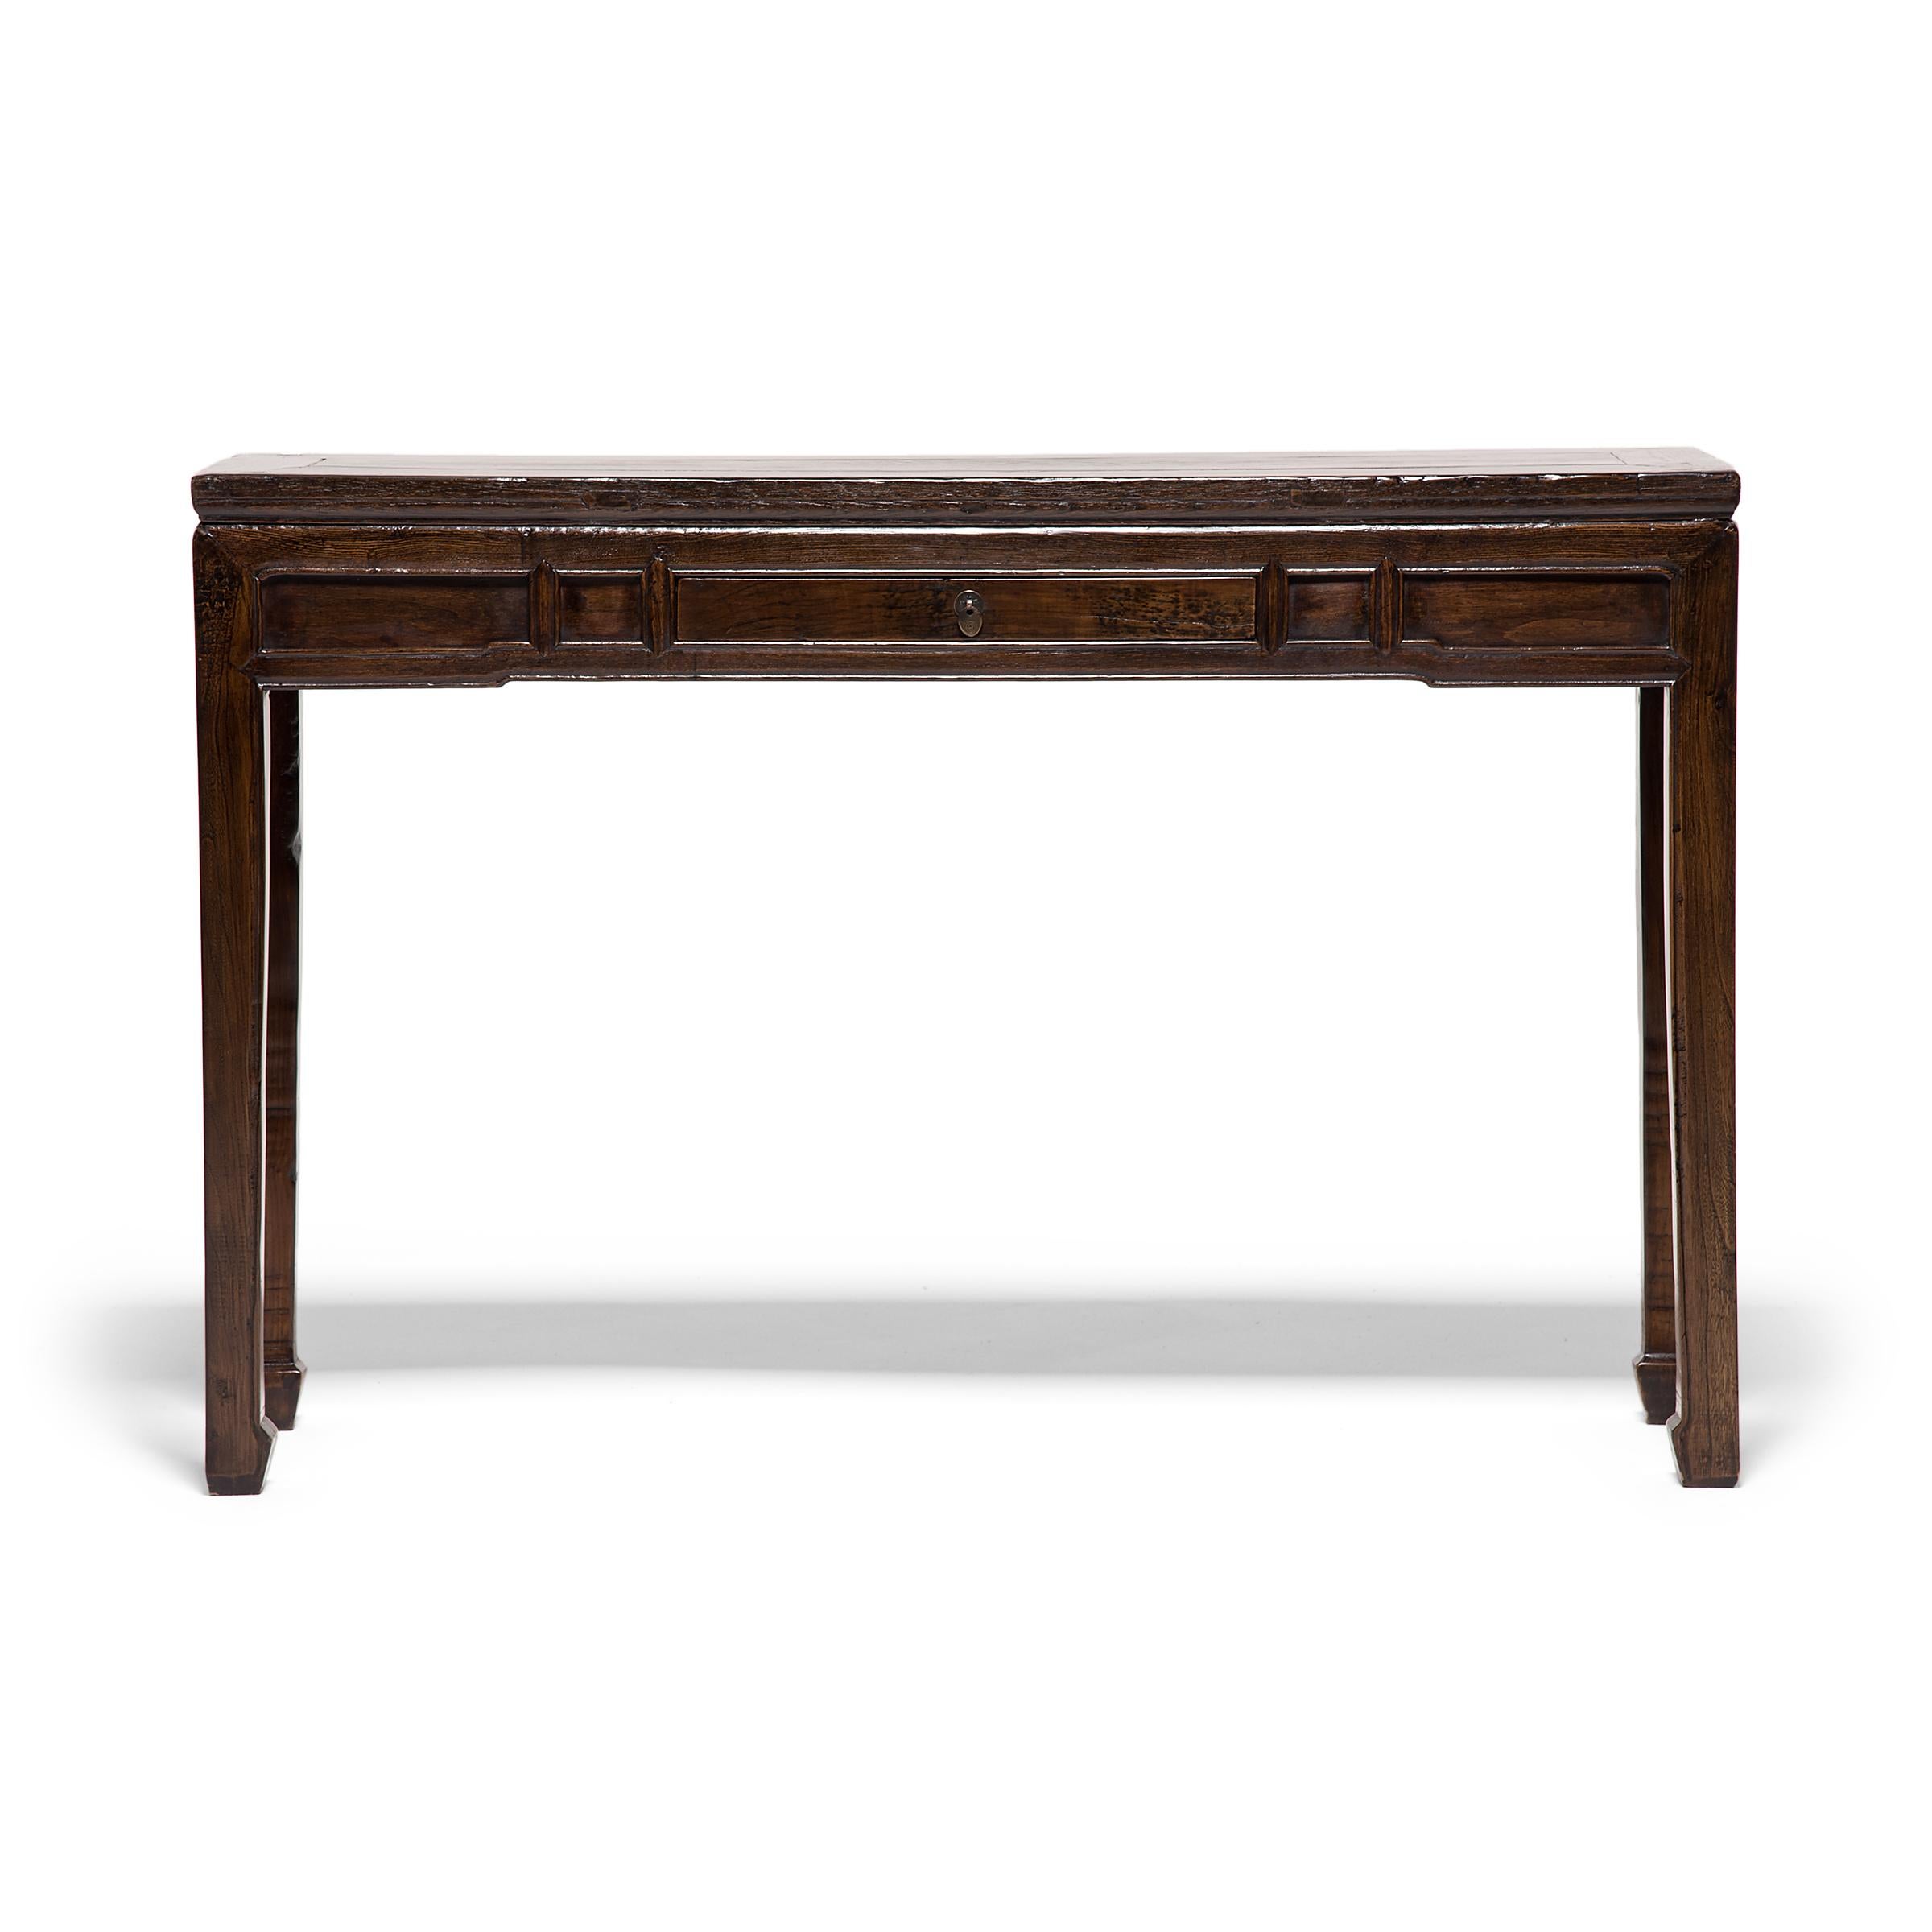 In Chinese furniture tradition, long, slender tables like such as this are known as altar tables and for centuries have been used to hold musical instruments, flowers, or precious objects. This minimal example was crafted in China's Shanxi province